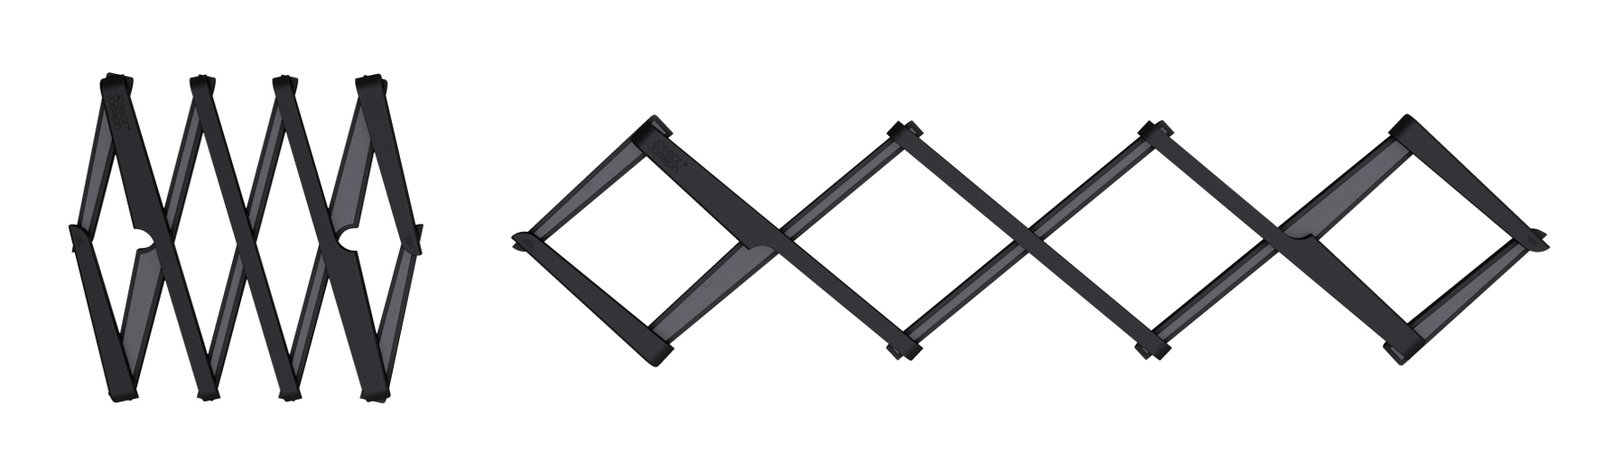 Joseph Joseph Stretch Folding Silicone Trivet for Hot Pot and Pan, Expanding non slip stand, heat resistant mat for Kitchen Countertop - Black